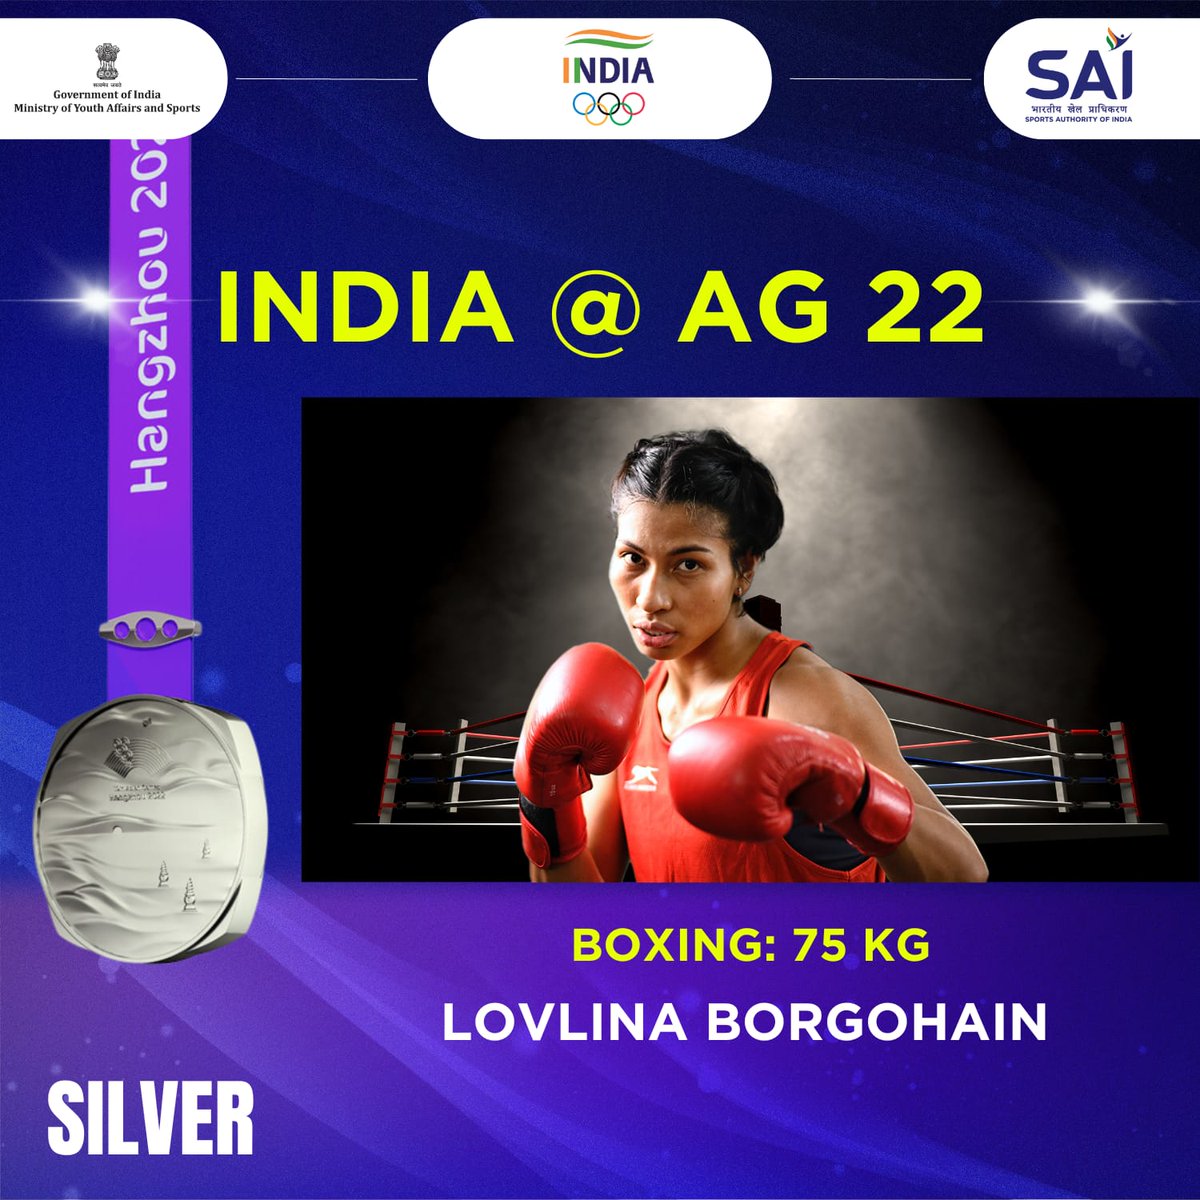 SHINING SILVER🥈 FOR LOVLINA🌟

🇮🇳's Boxer and #TOPSchemeAthlete @LovlinaBorgohai wins the SILVER 🥈medal in the Women's 75 kg category 🇮🇳🏅

Her incredible prowess in the ring shines brighter than ever. Let's give her a thunderous round of applause! 🥳💪

Congratulations,…